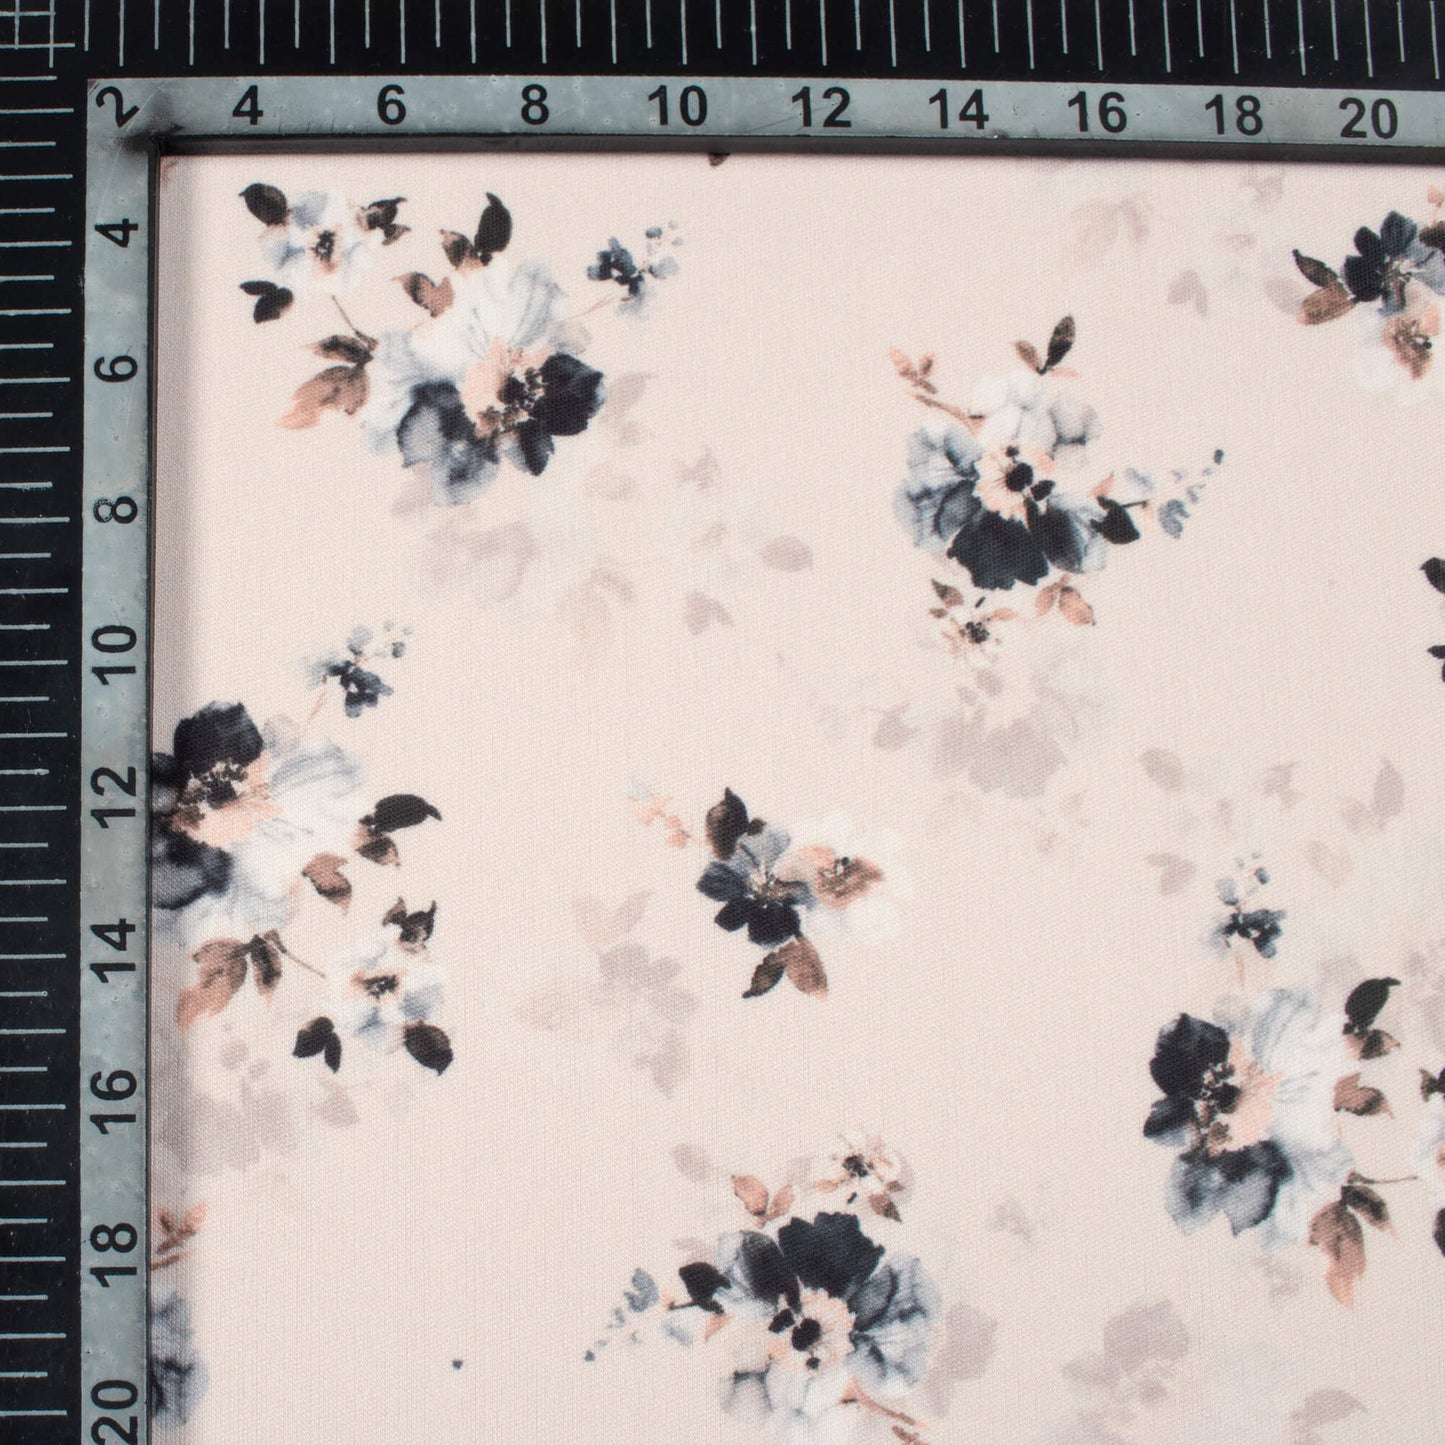 Linen Beige And Black Floral Pattern Digital Print Lycra Fabric (Width 58 Inches)